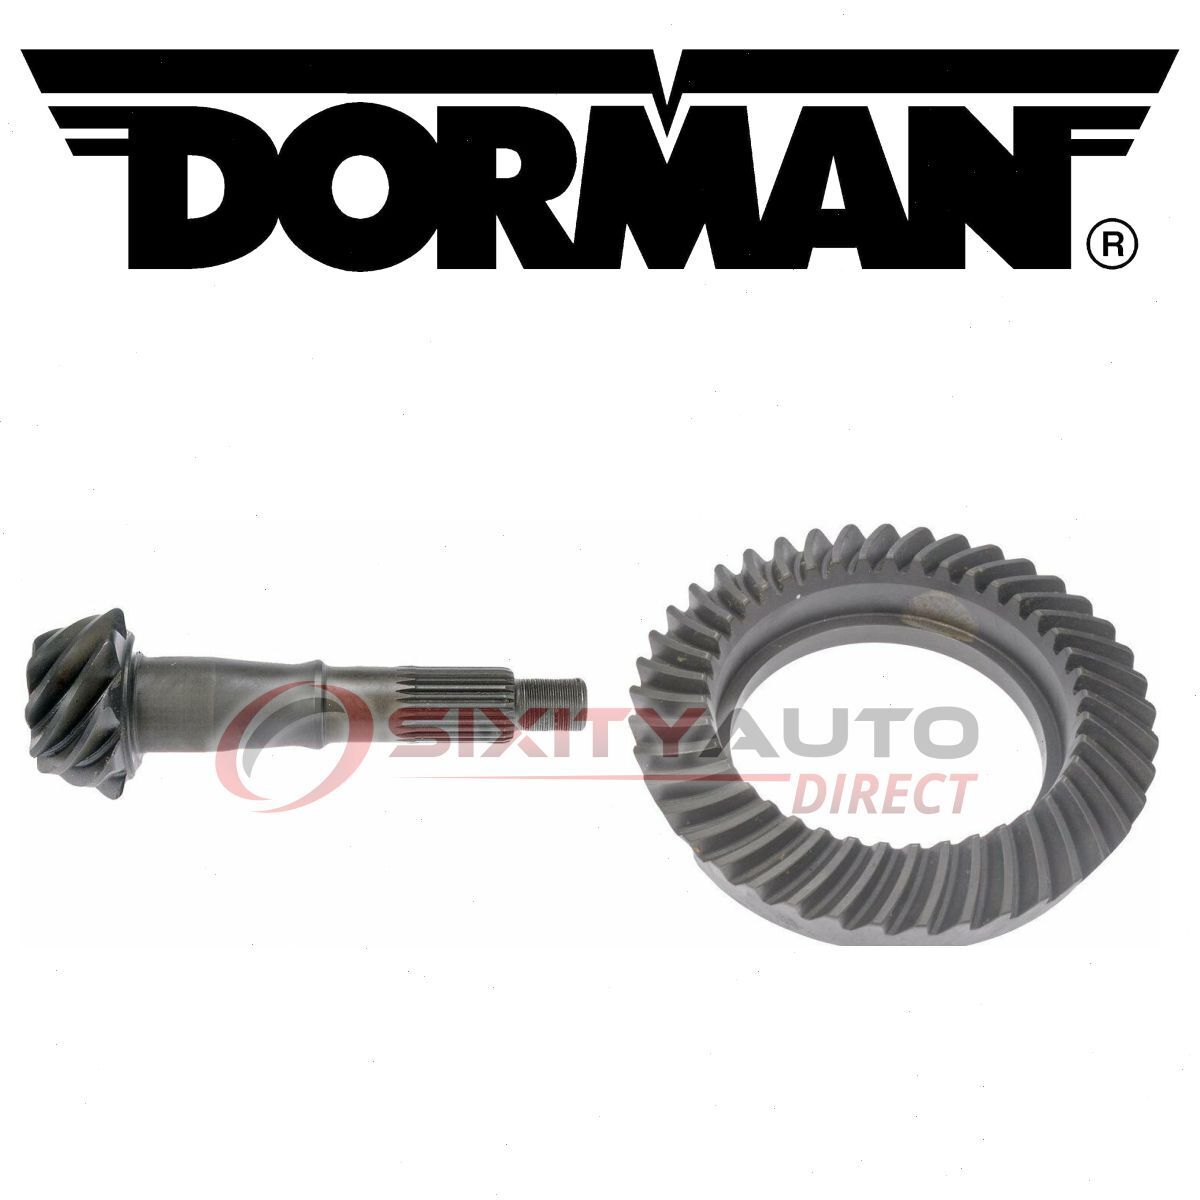 Dorman Rear Differential Ring & Pinion for 1978-1984 Oldsmobile Cutlass ft